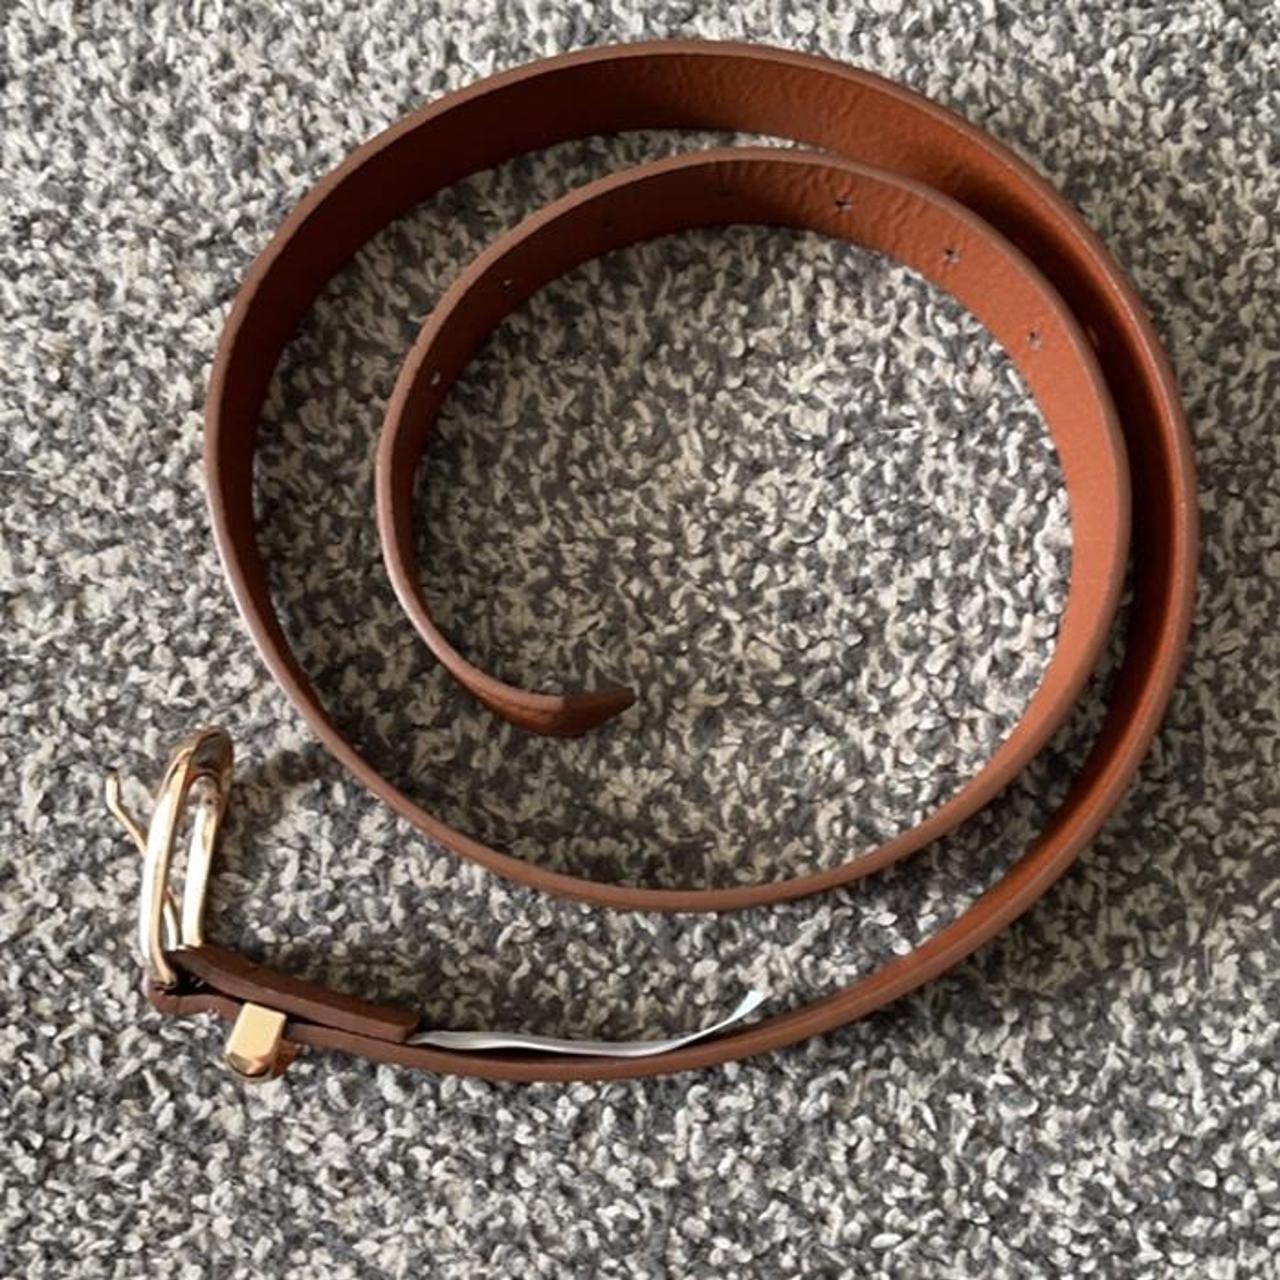 Fake leather belt with a gold buckle - Depop